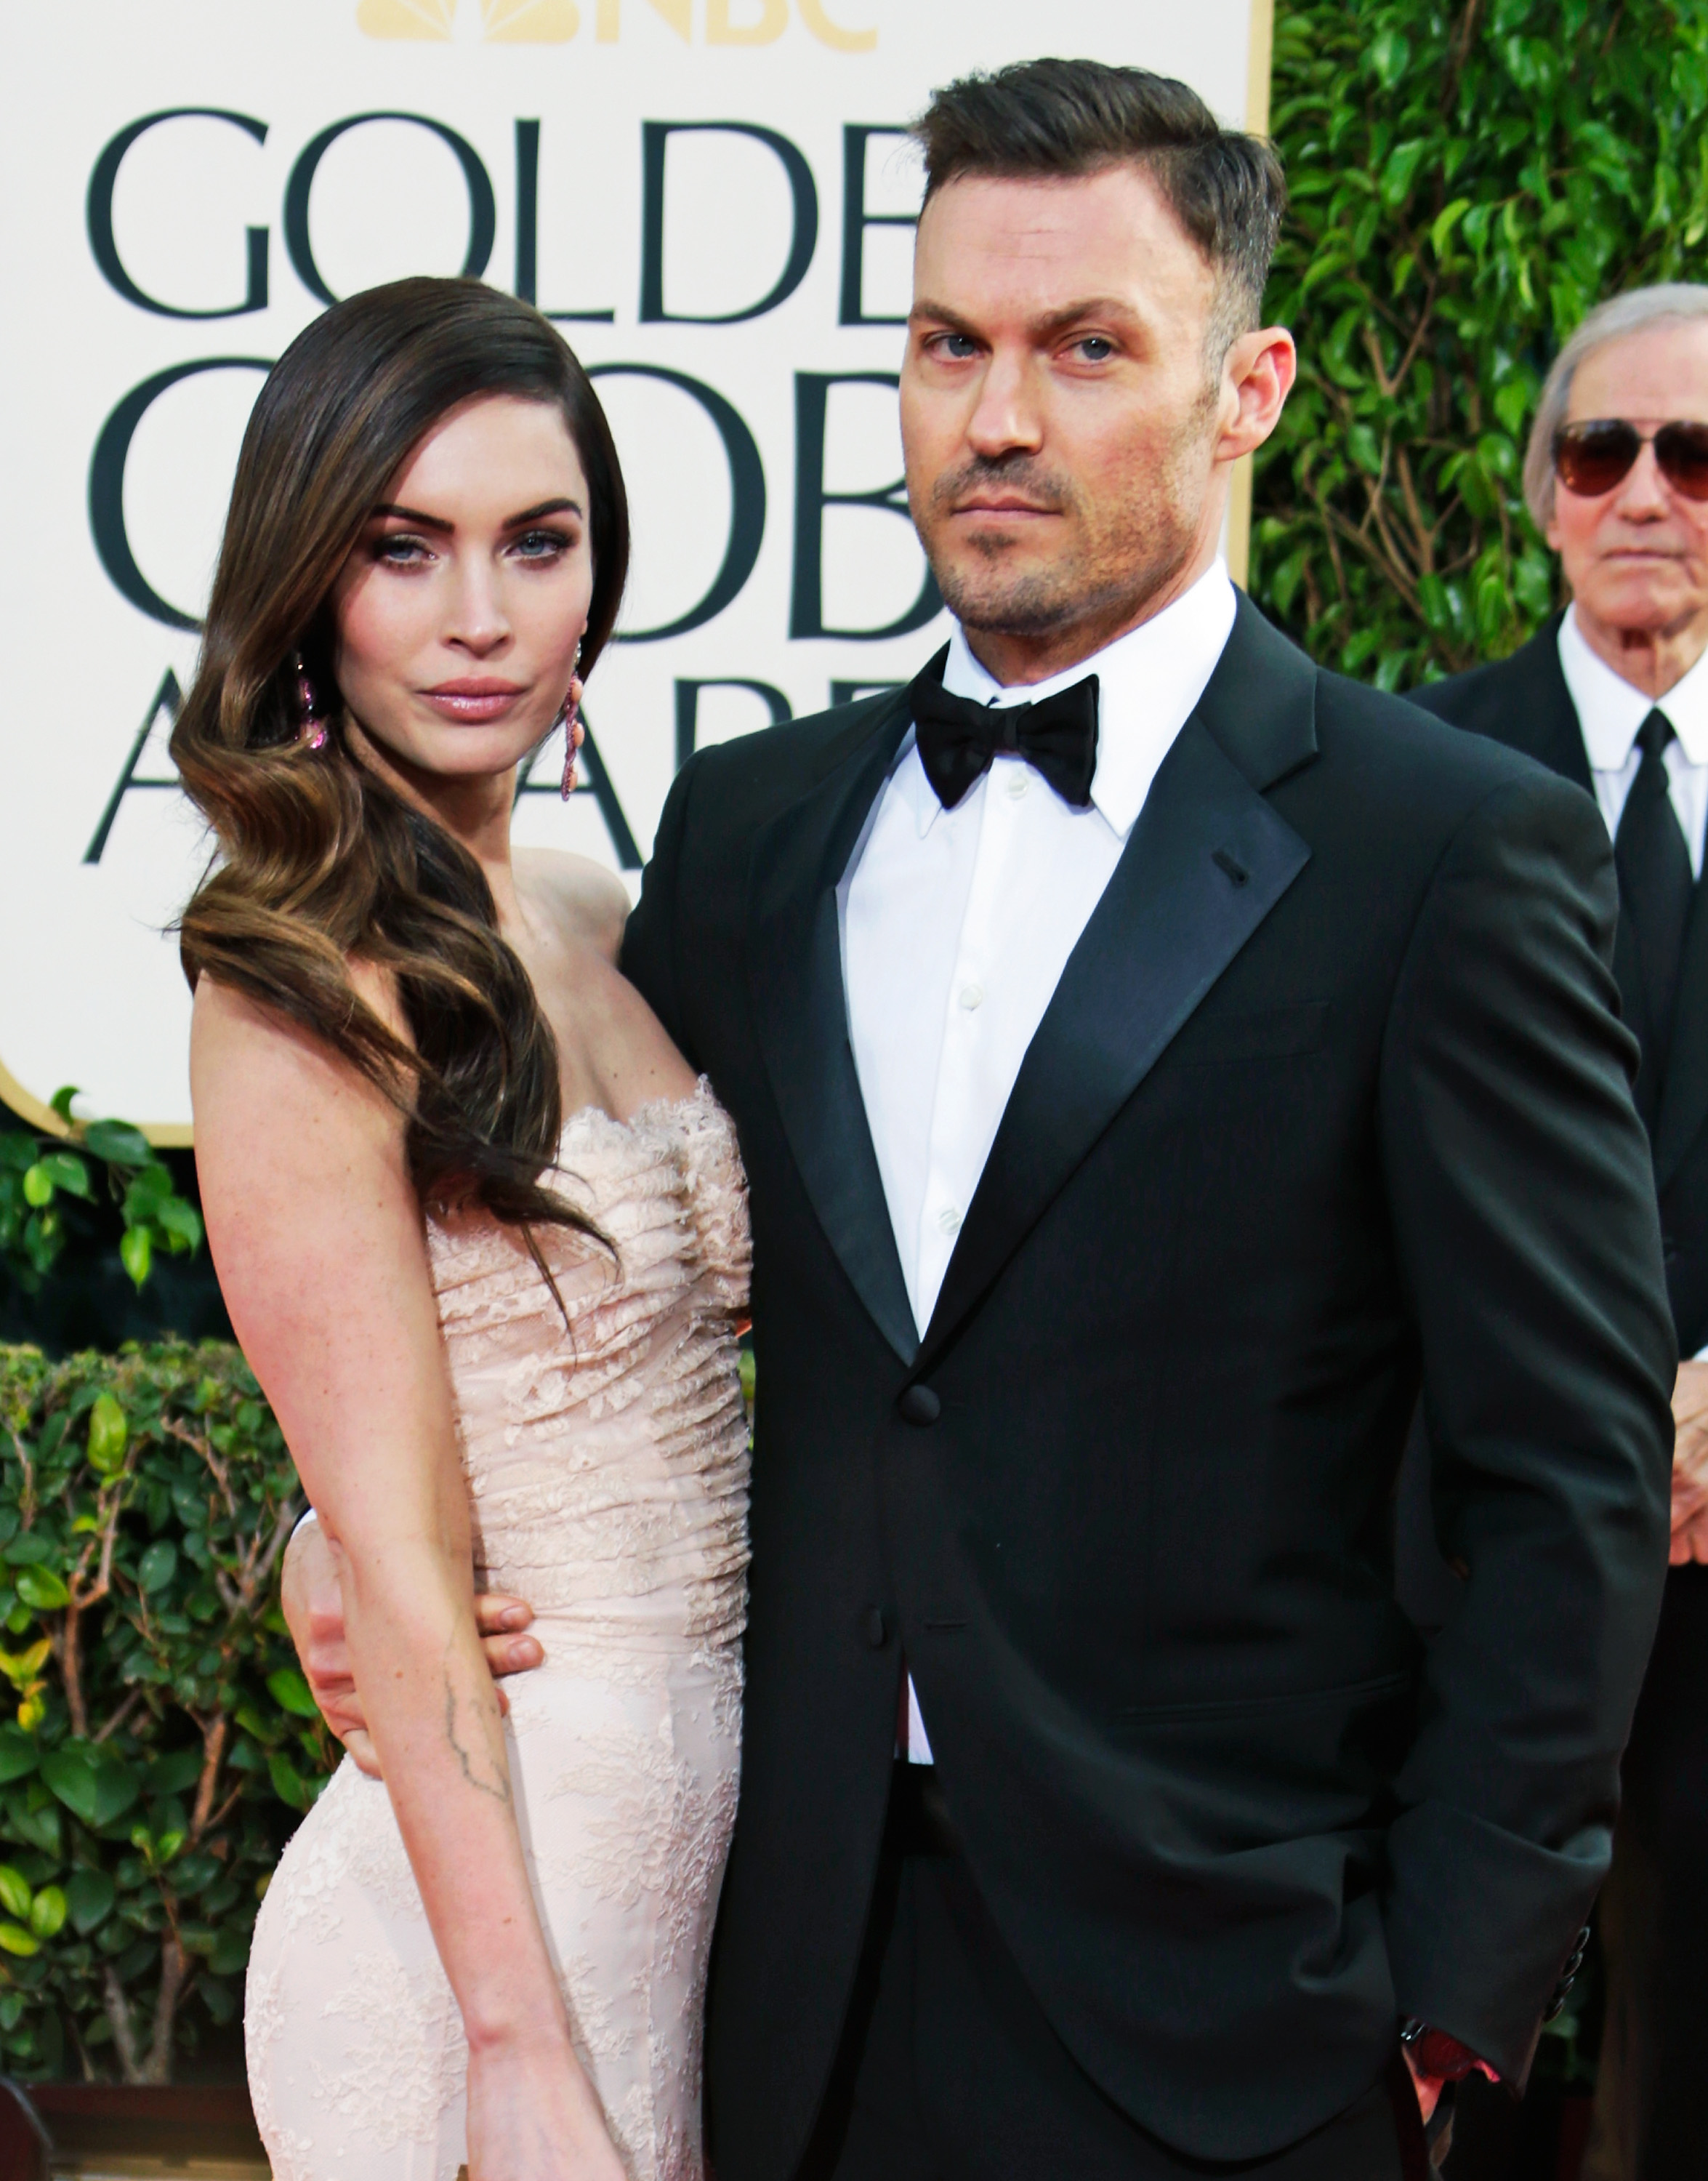 Actors Megan Fox and Brian Austin Green on January 13, 2013, in Beverly Hills, California. | Source: Getty Images